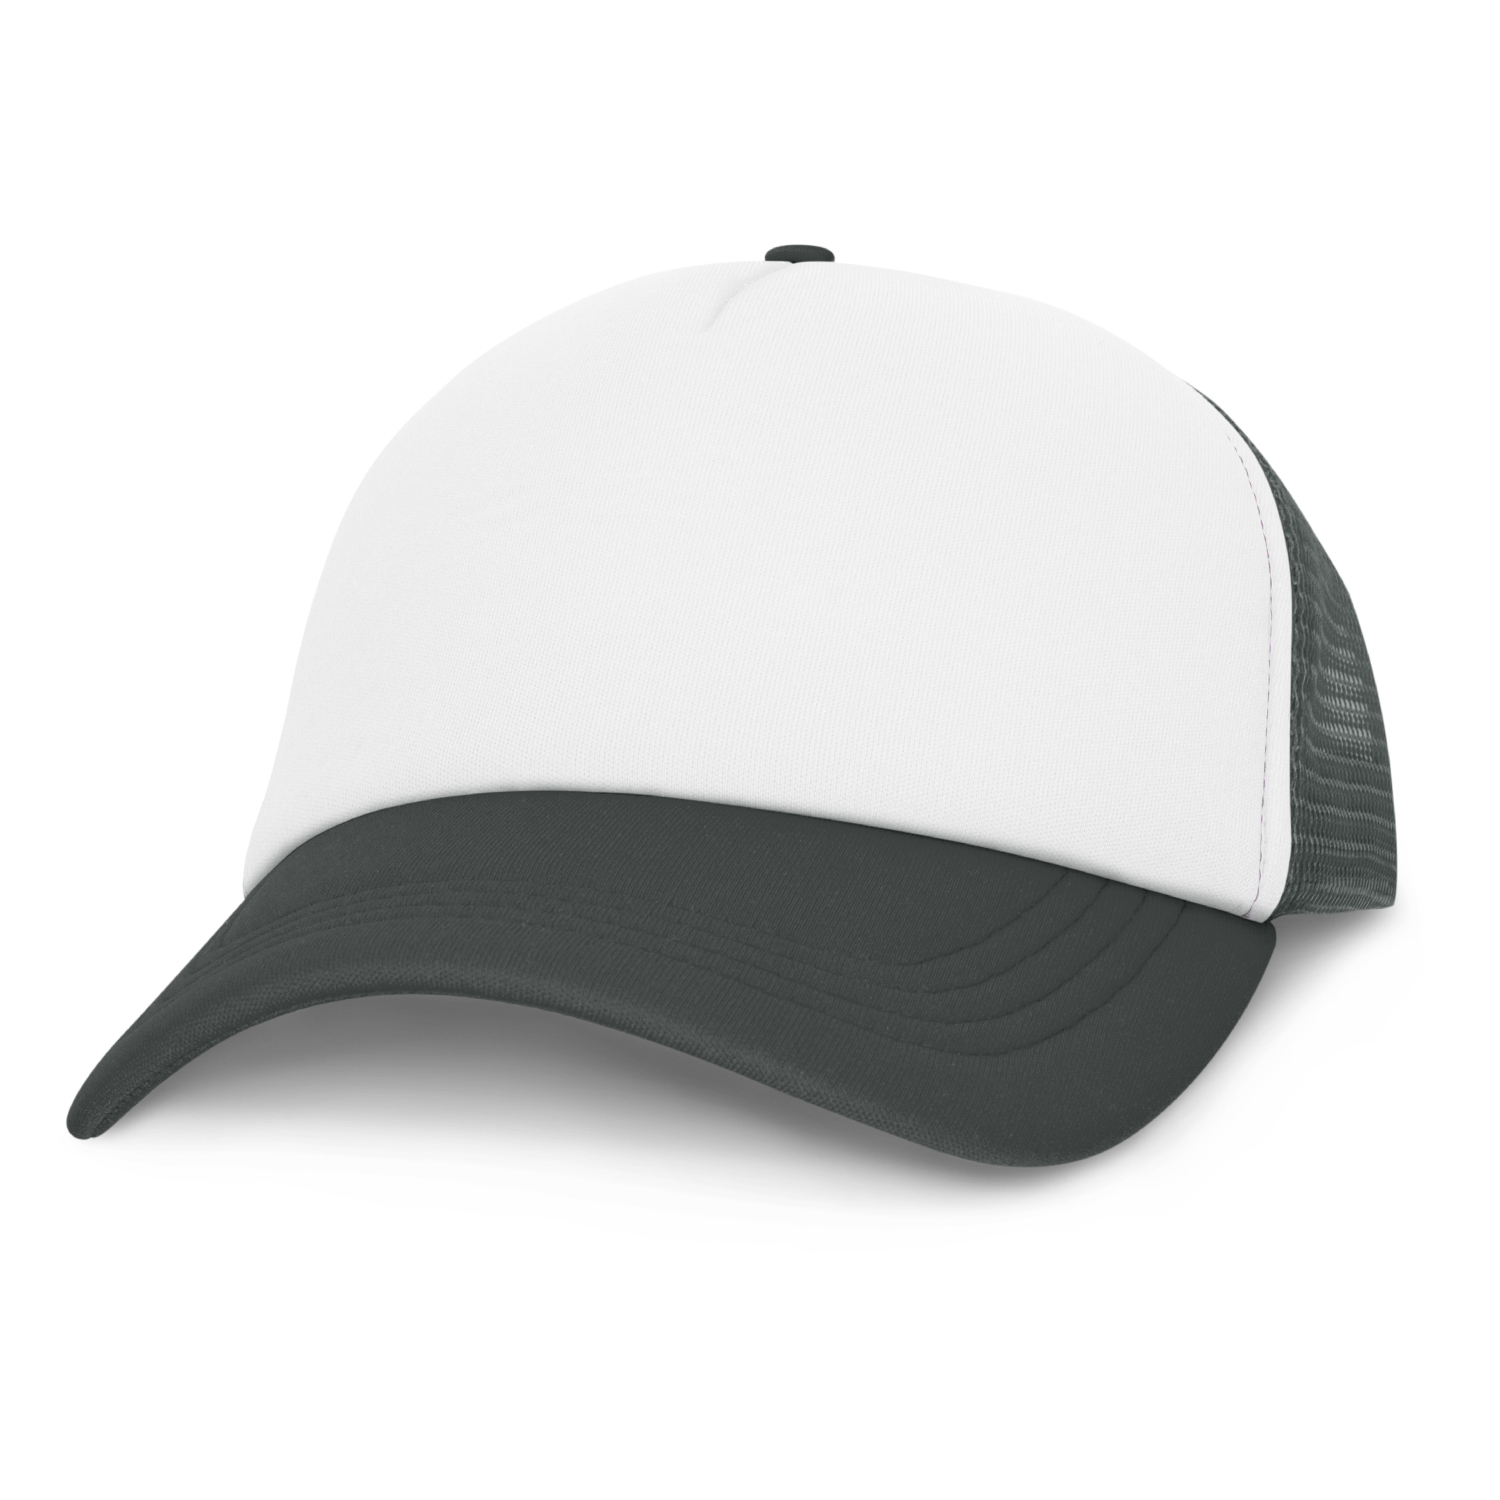 TRENDS  Cruise Mesh Cap - White Front